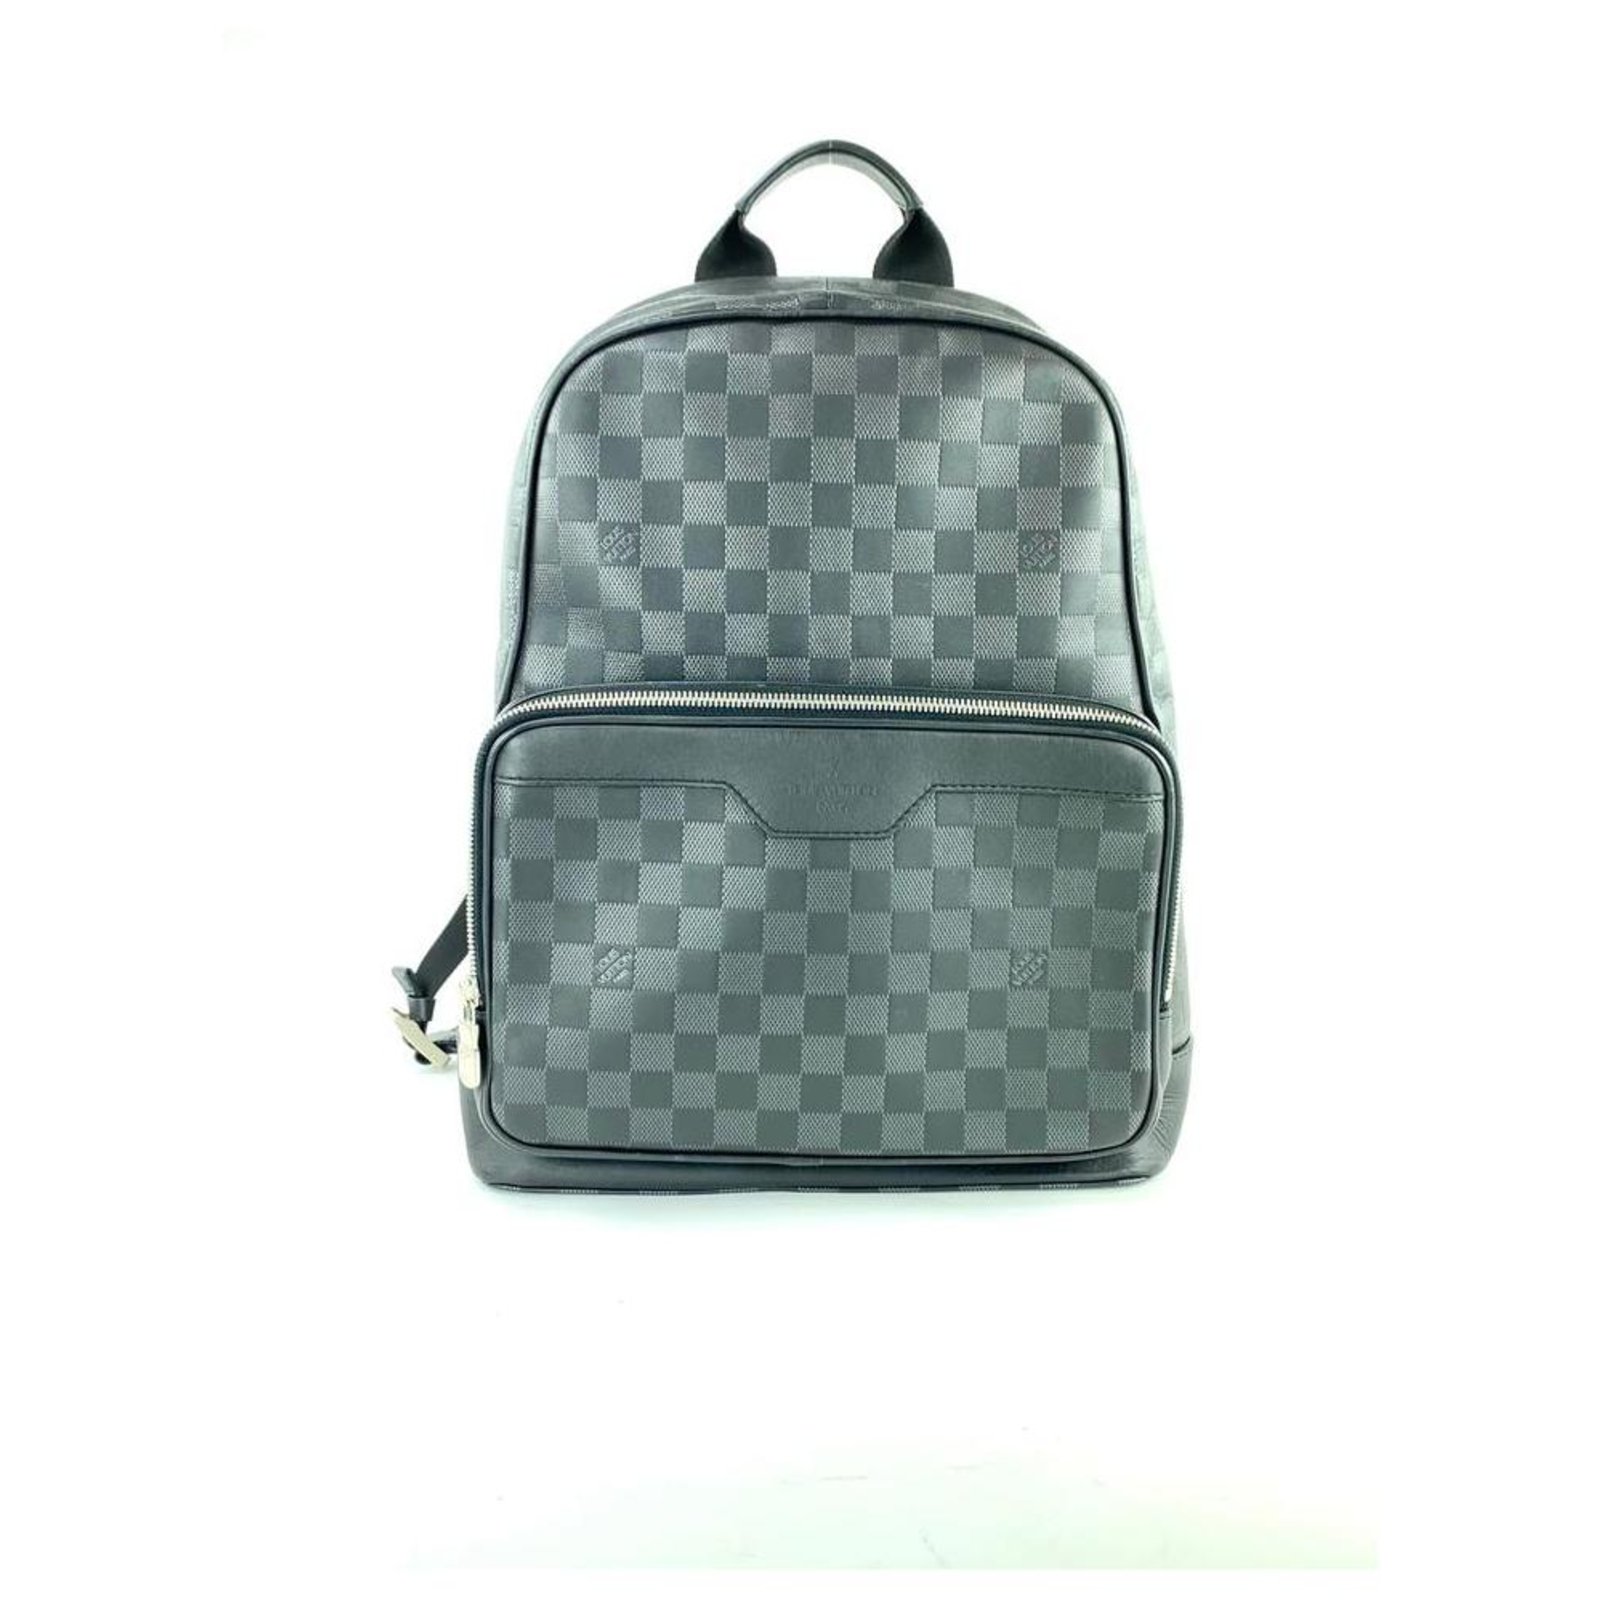 Louis Vuitton Campus Backpack Damier Infini Leather - ShopStyle